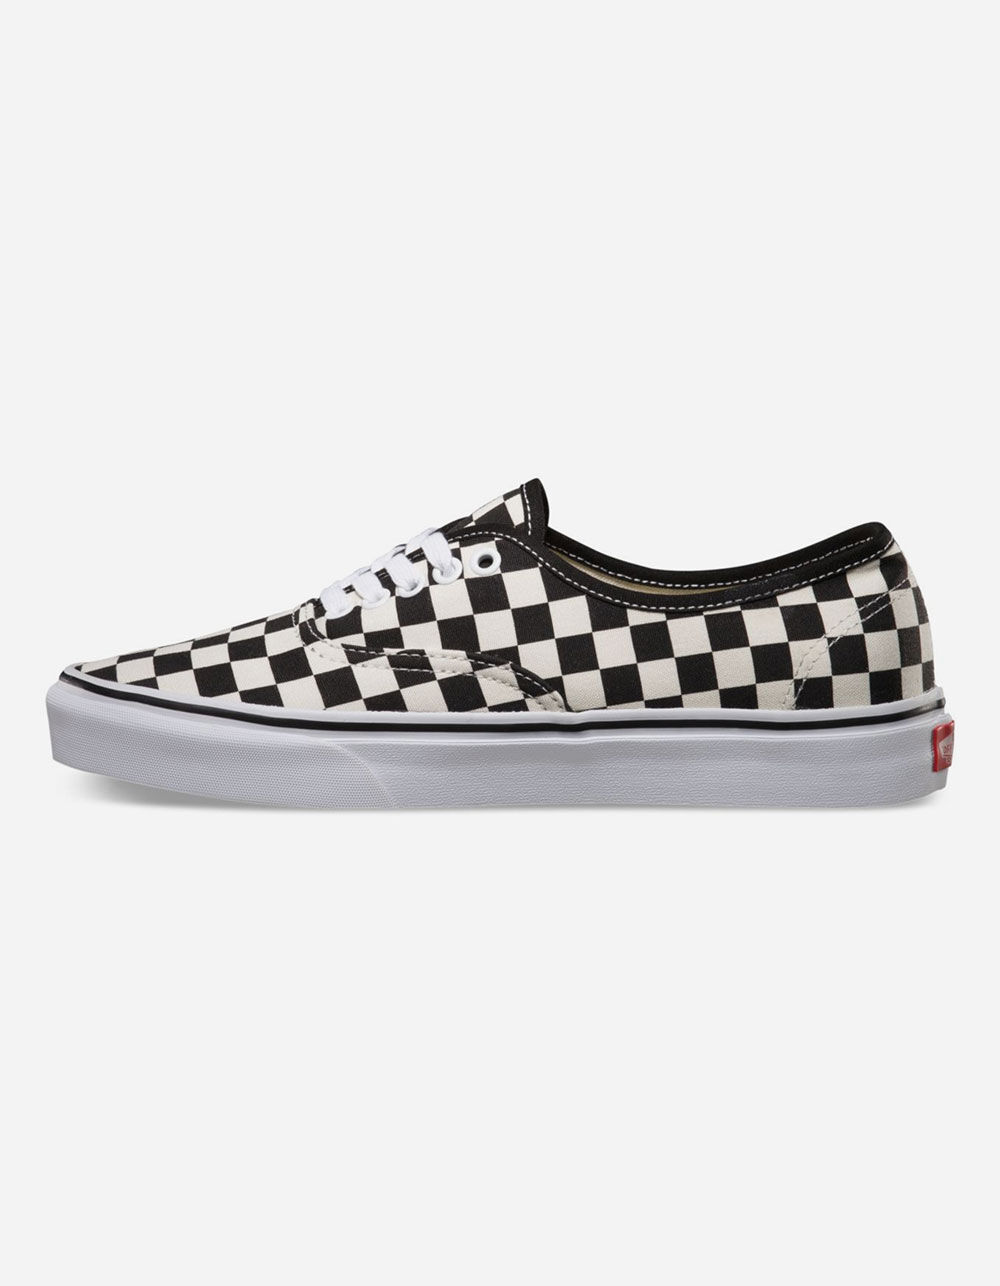 VANS Authentic Golden Coast Checkerboard Shoes image number 3